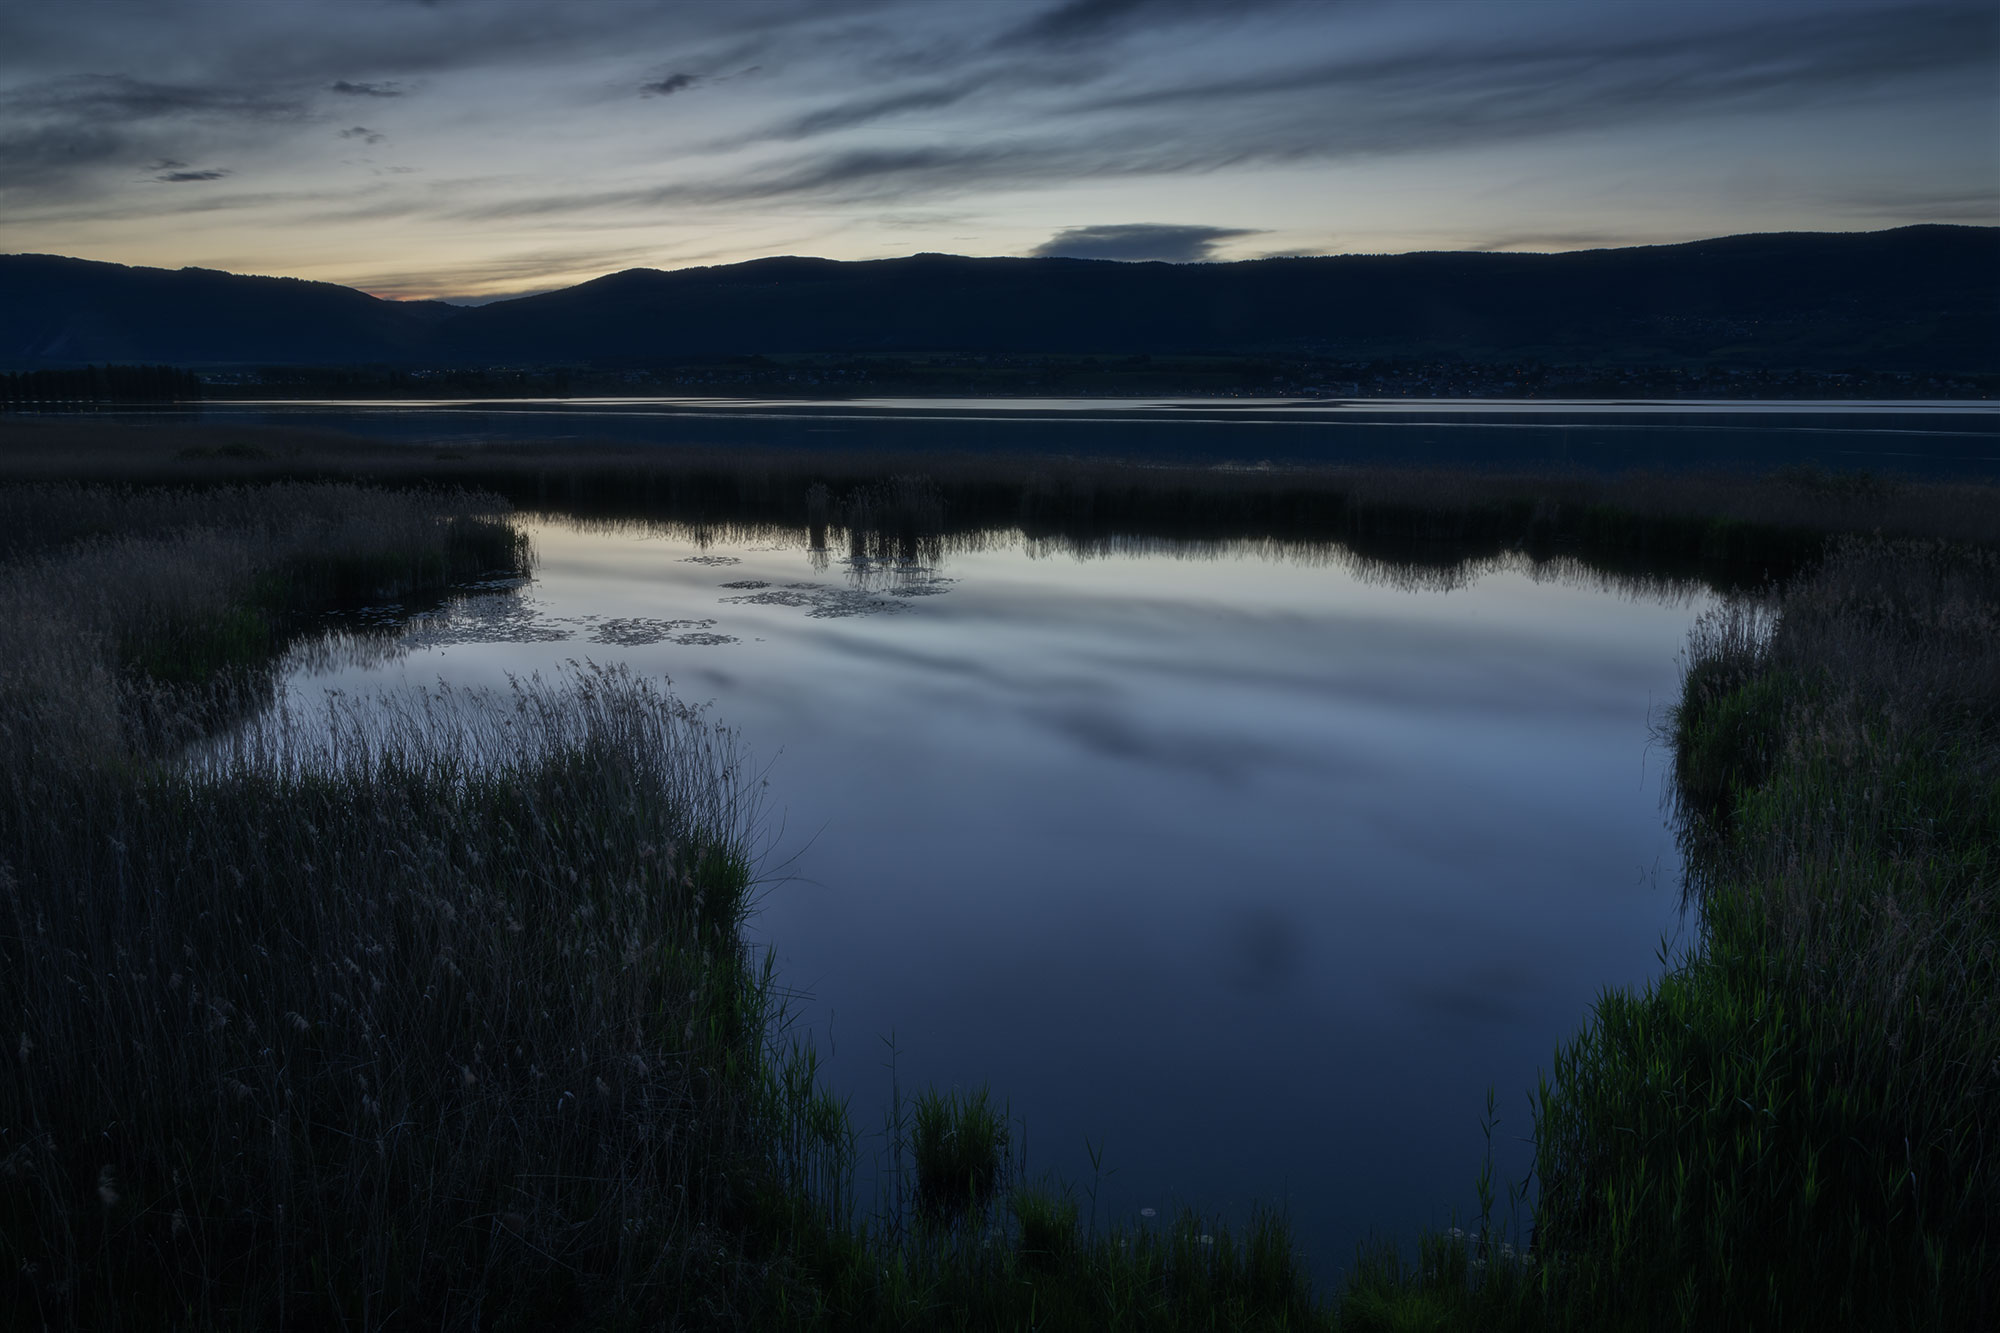 Landscape photography capturing twilight at the Grande Cariçaie nature reserve in Lake Neuchâtel, Switzerland. Photo taken with the Nikon Z8.